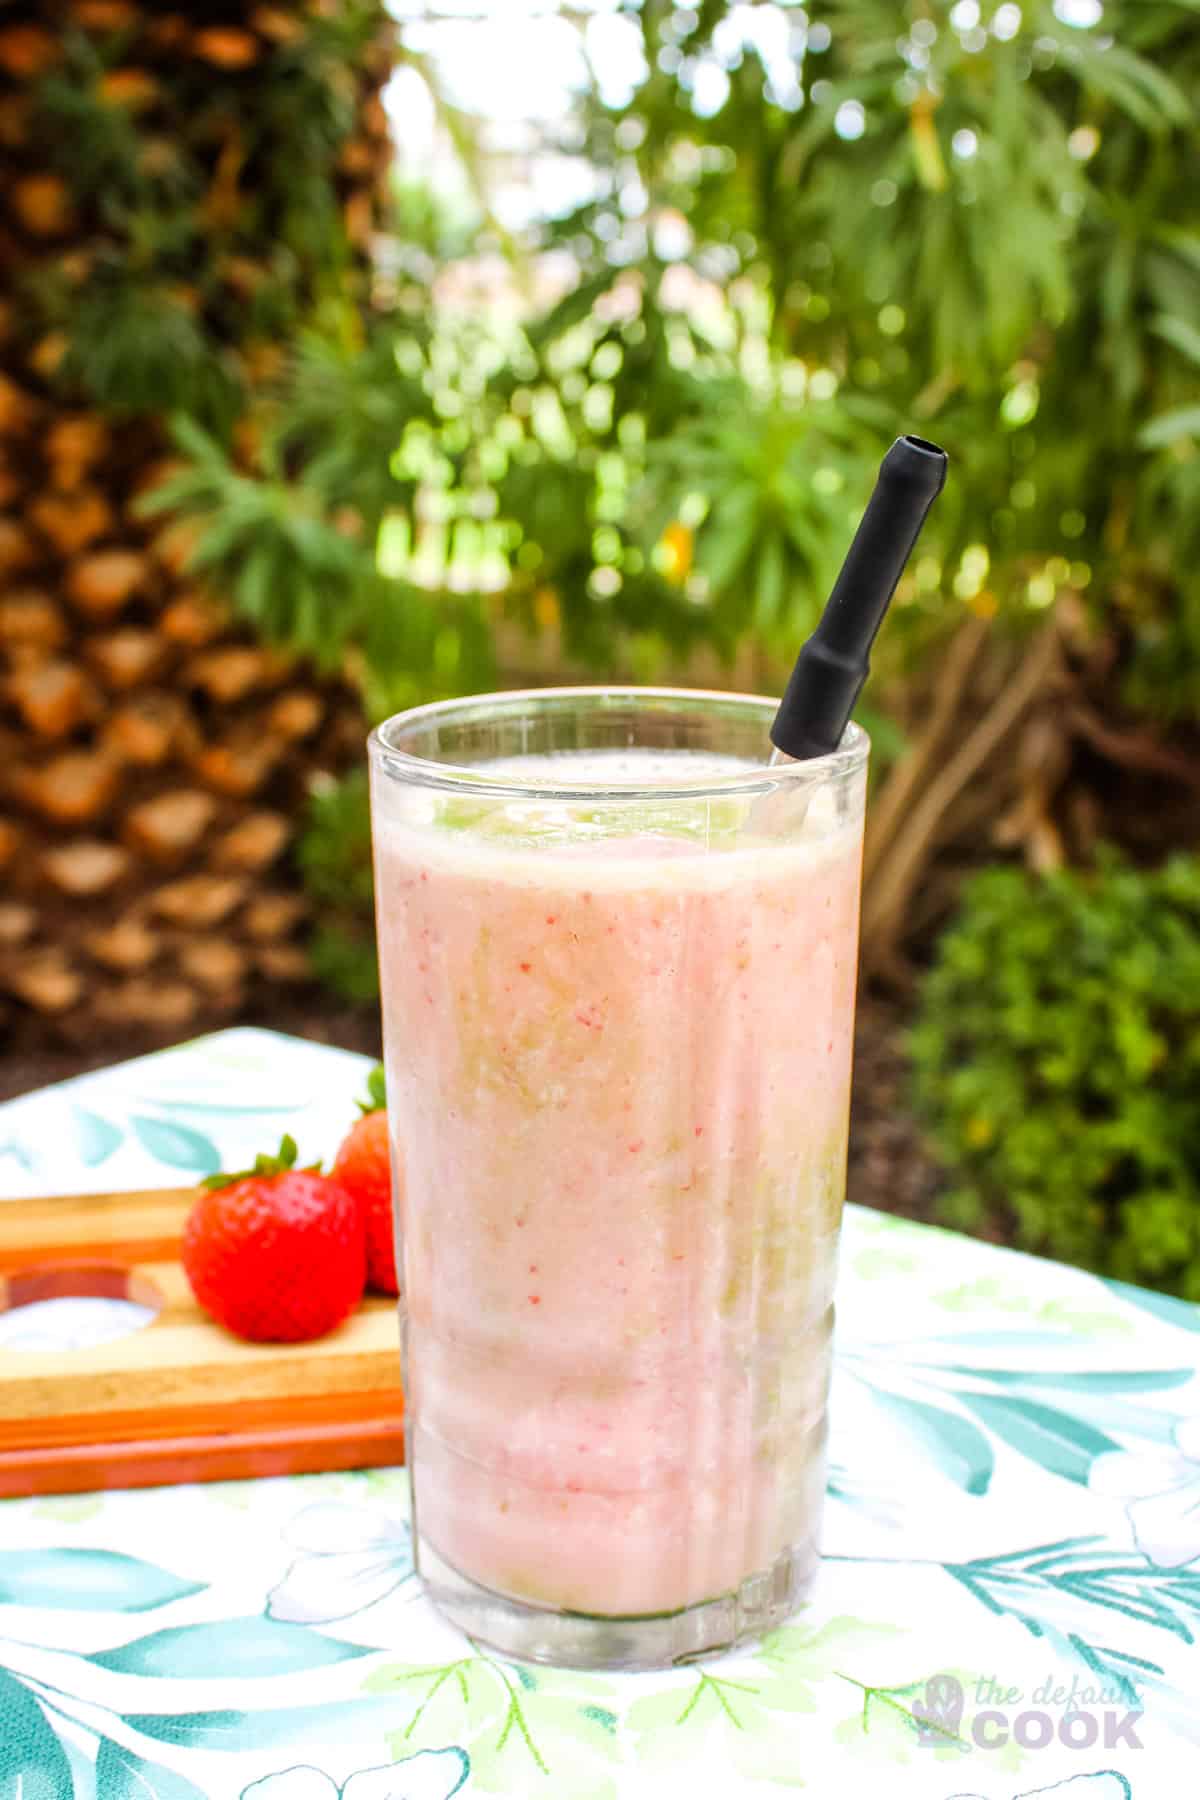 Smoothie on a table outdoors with strawberries and greenery behind it.